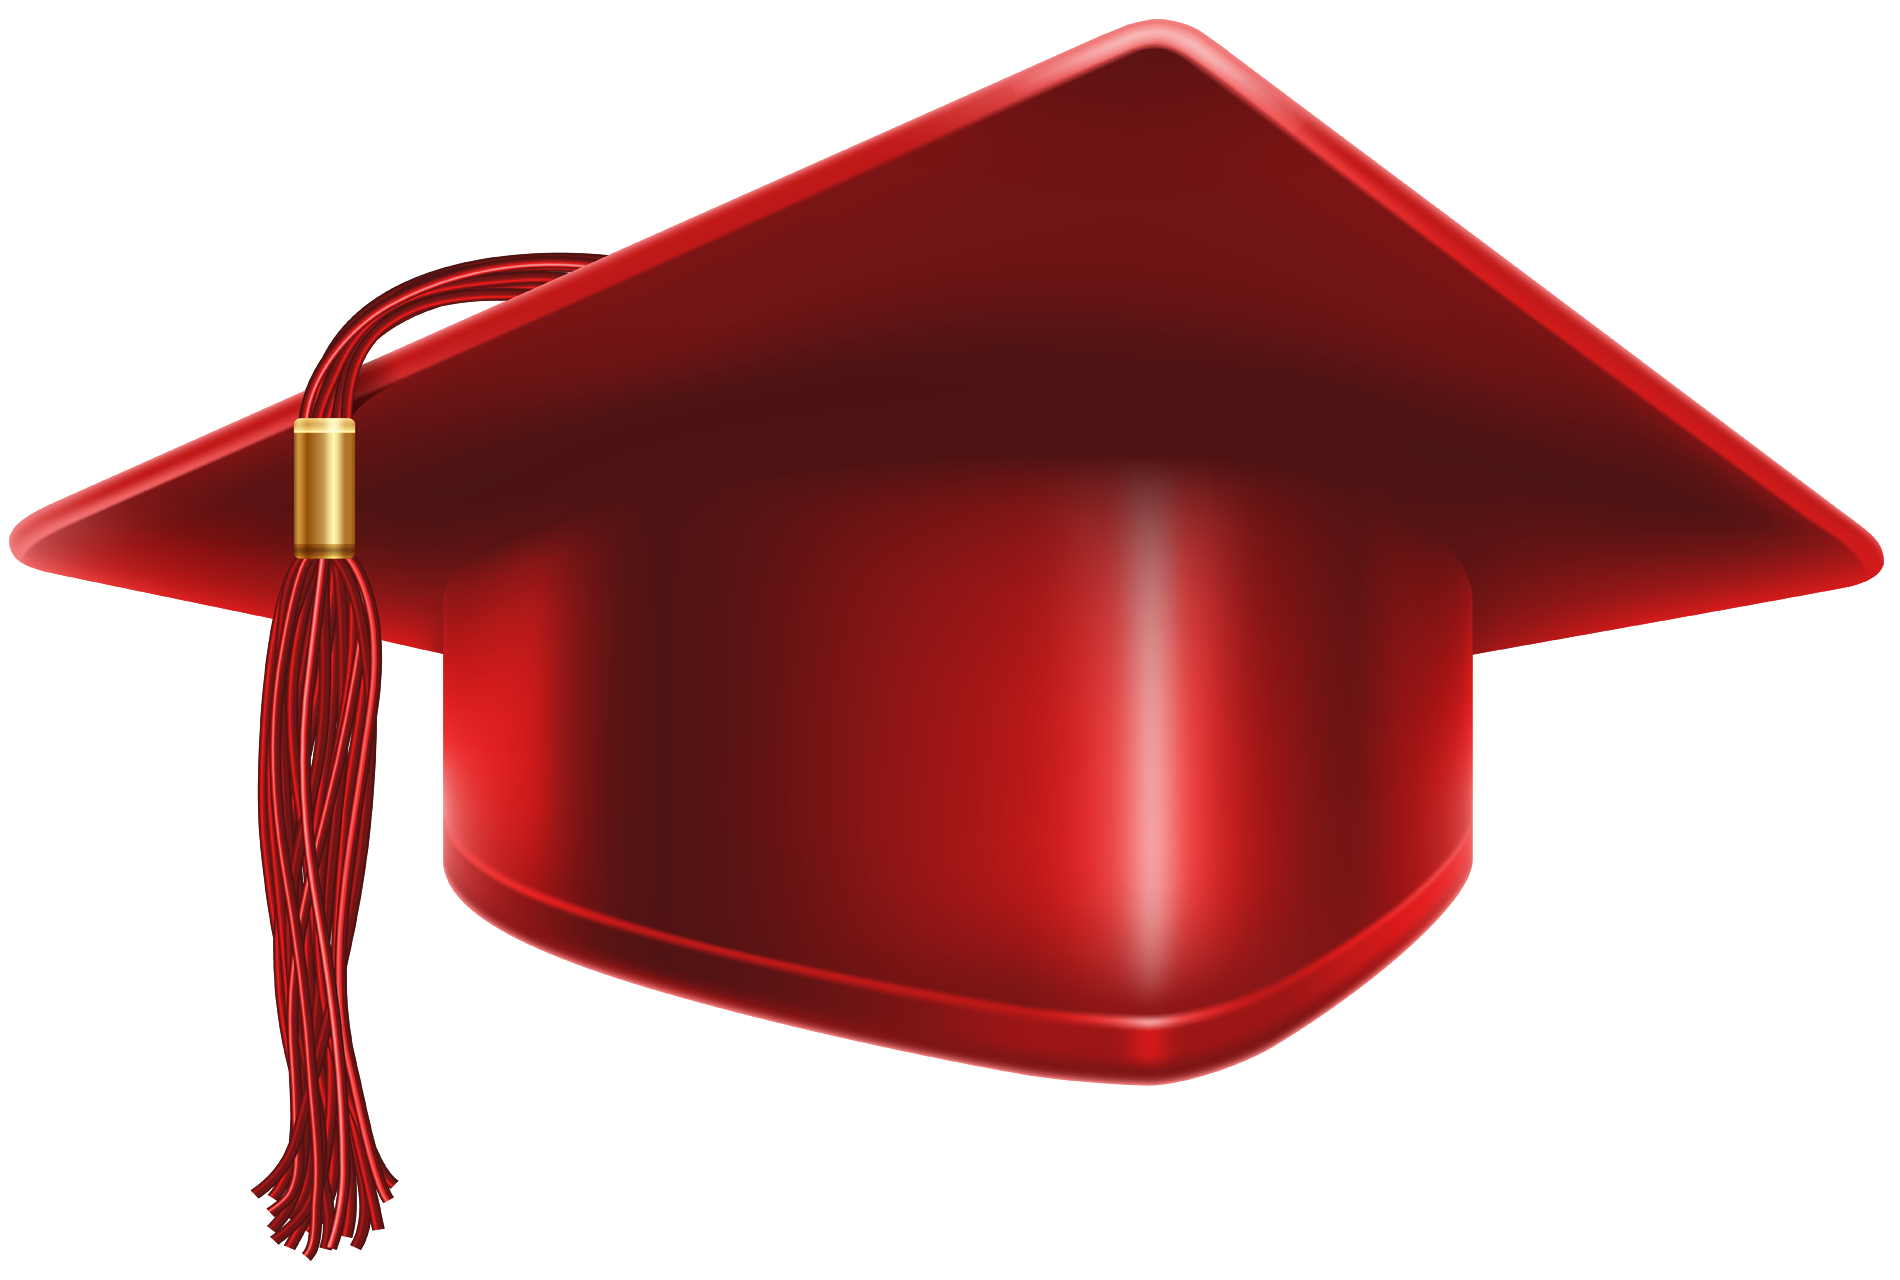 Graduation Cap Red Hd Png Transparent Background Free Download 45658 Freeiconspng